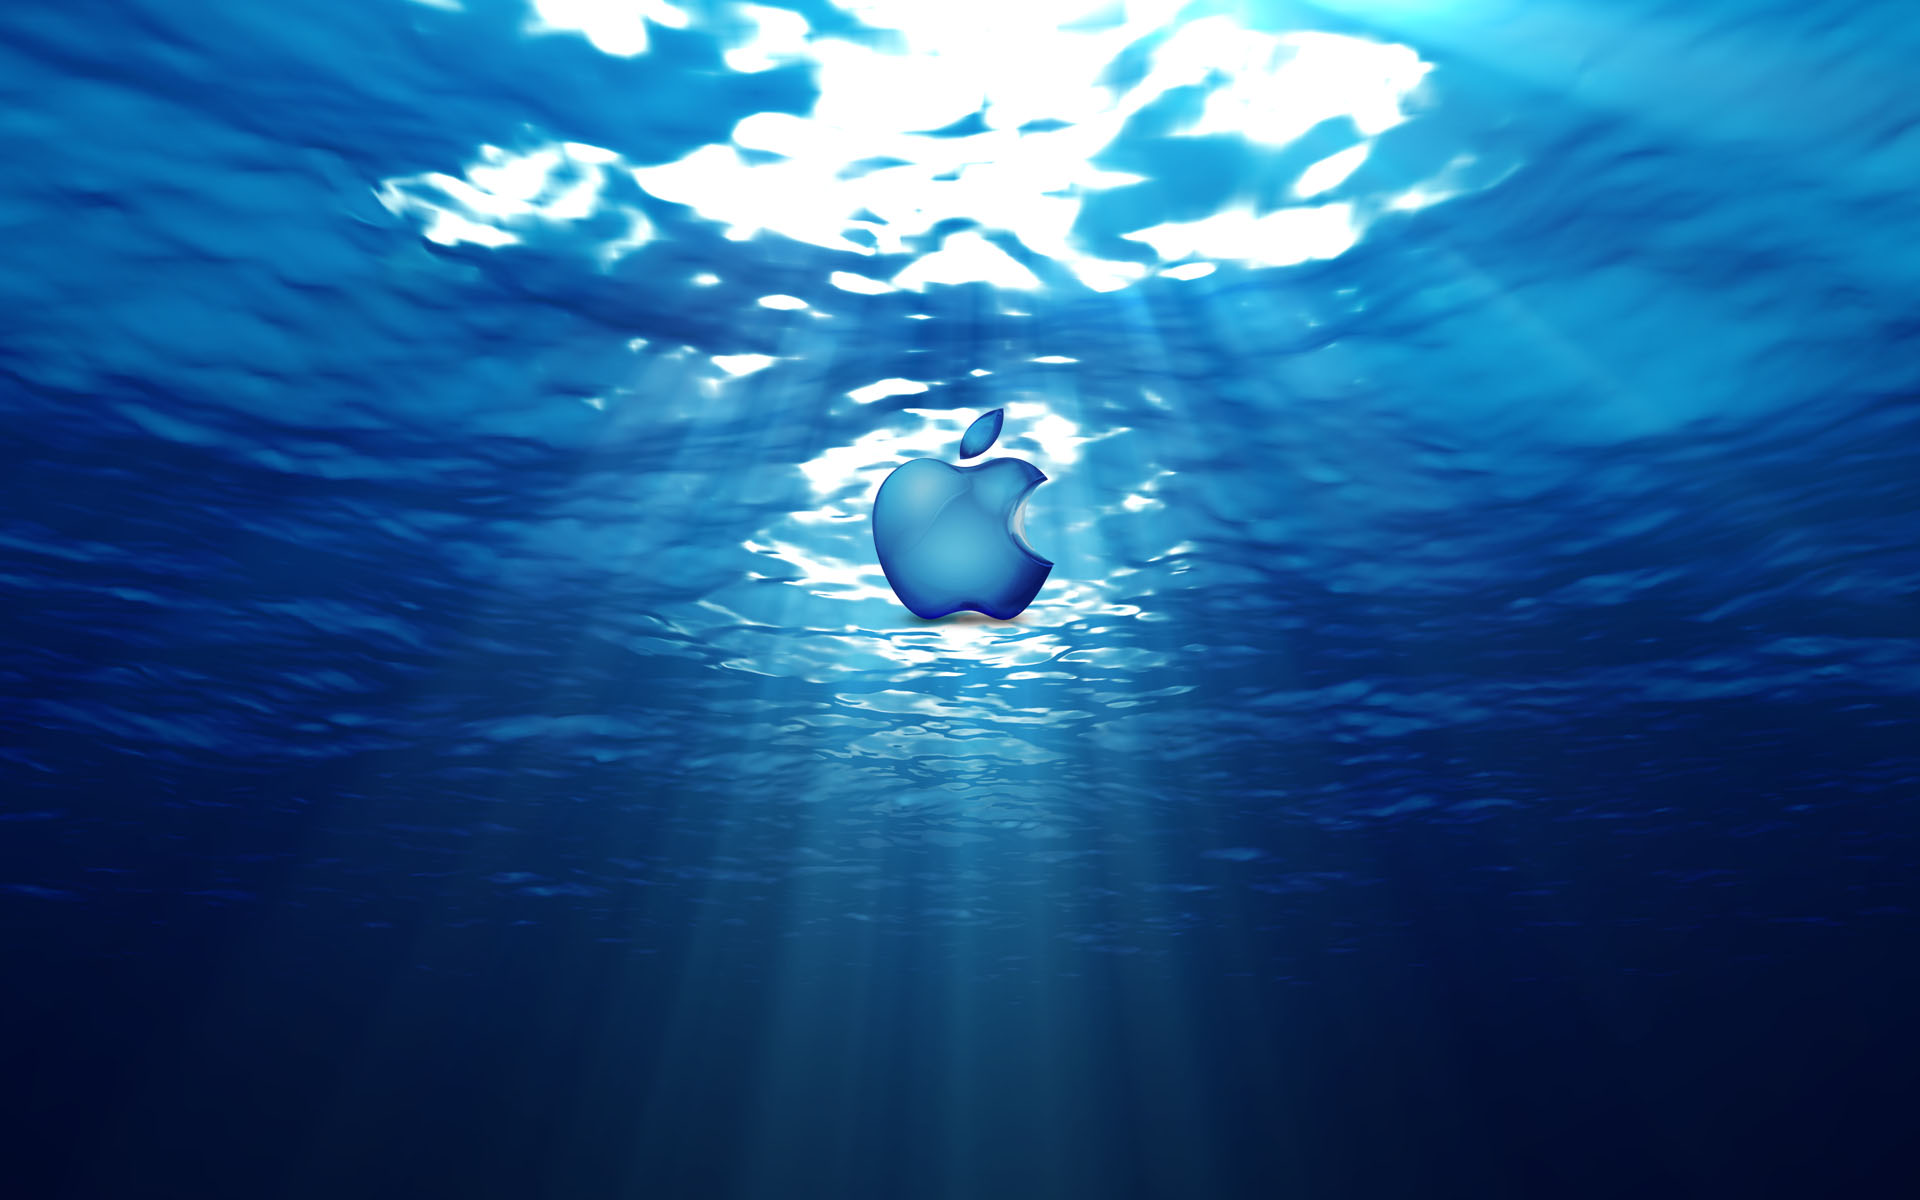 apple computer backgrounds #23